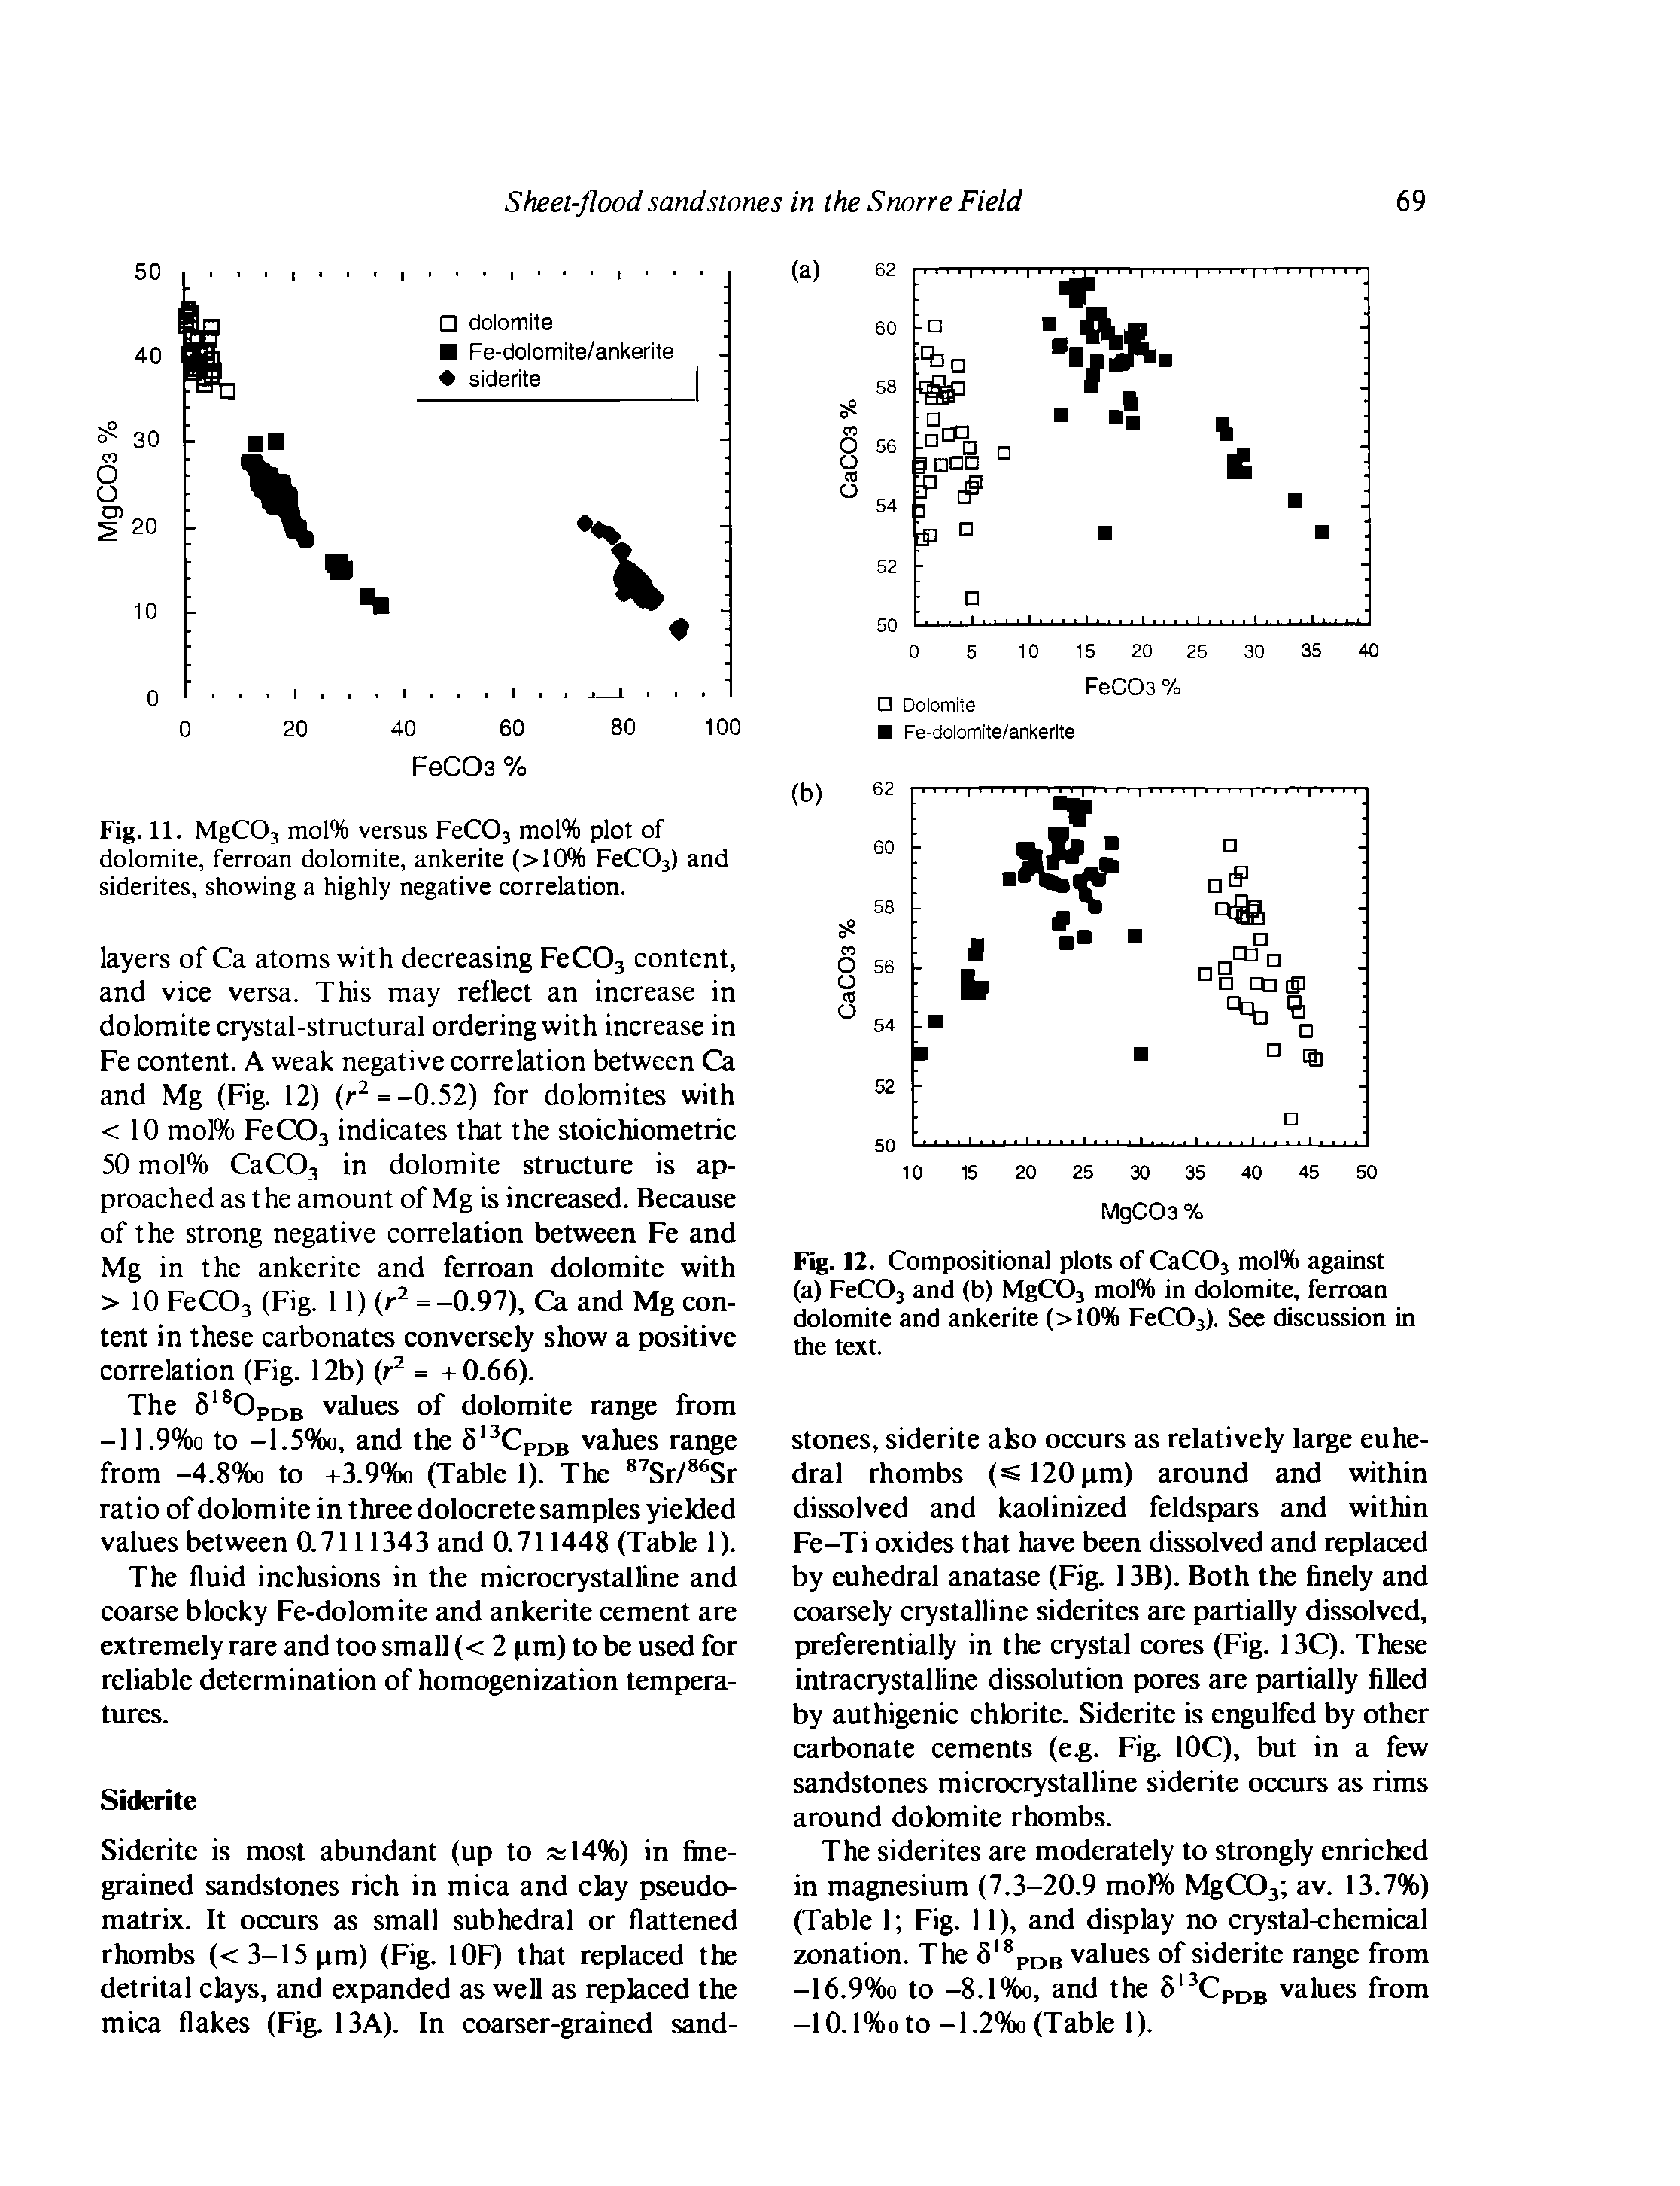 Fig. 11. MgC03 mol% versus FeCOs mol% plot of dolomite, ferroan dolomite, ankerite (>10% FeC03) and siderites, showing a highly negative correlation.